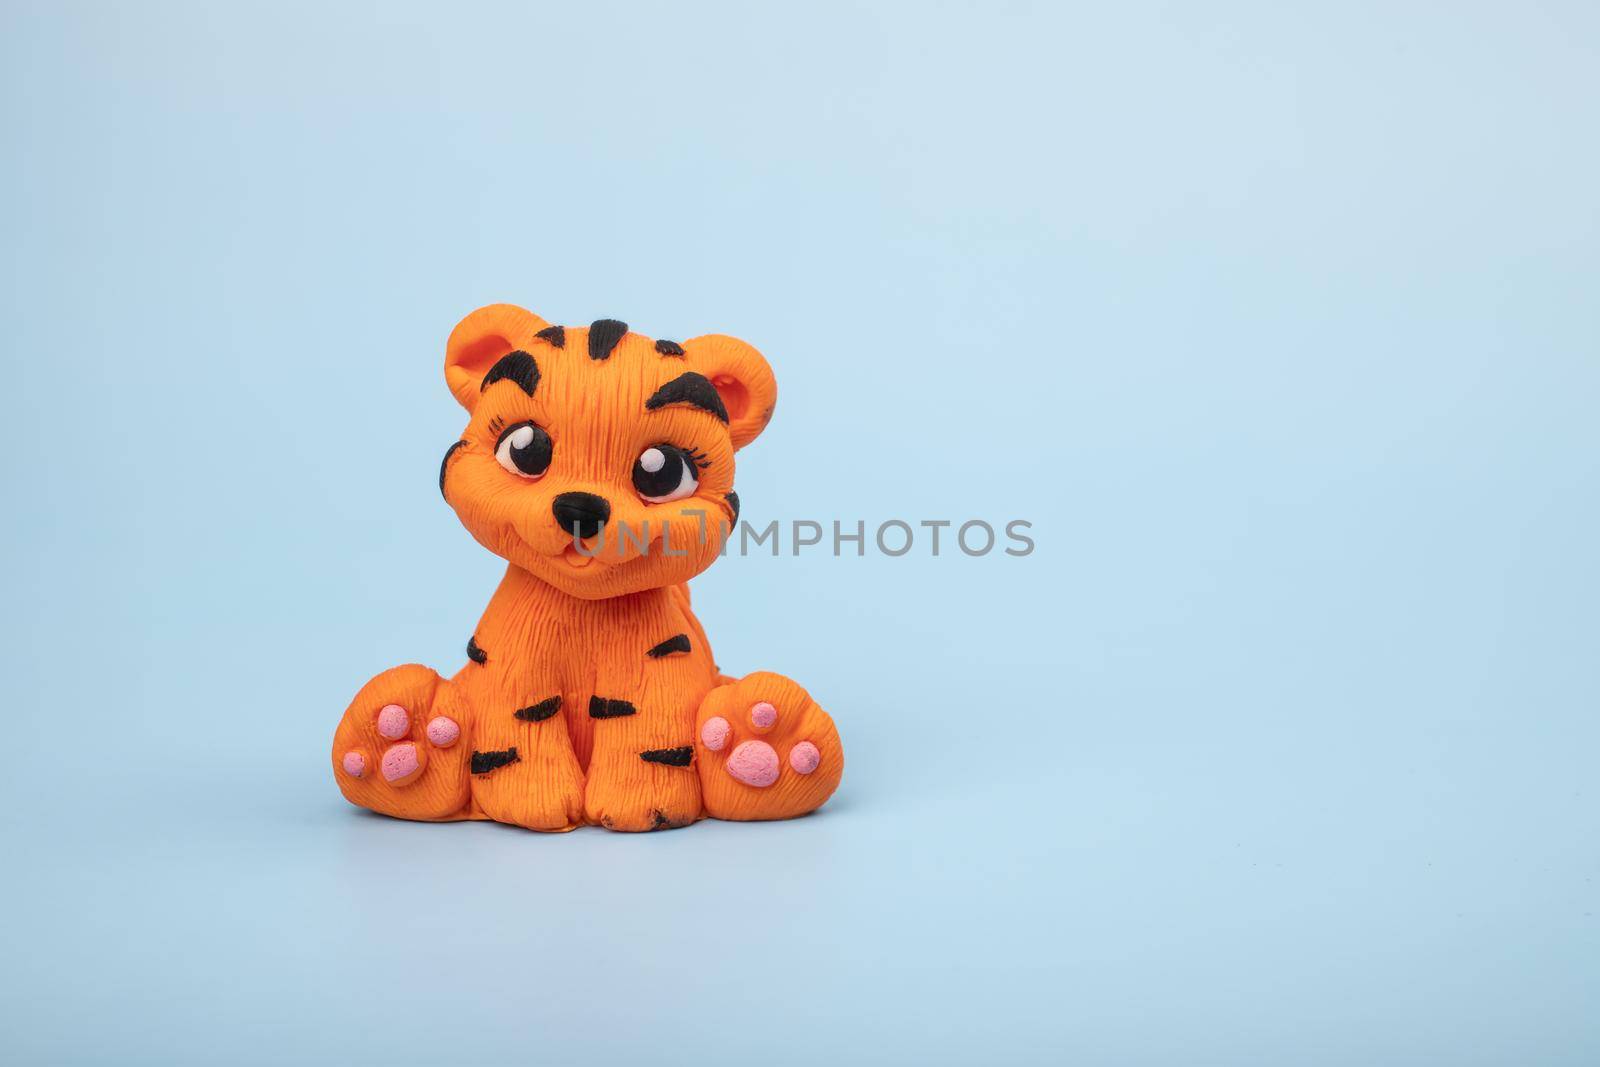 An orange tiger figurine on a blue background. The year 2022 is the year of the tiger according to the Eastern calendar. by bySergPo